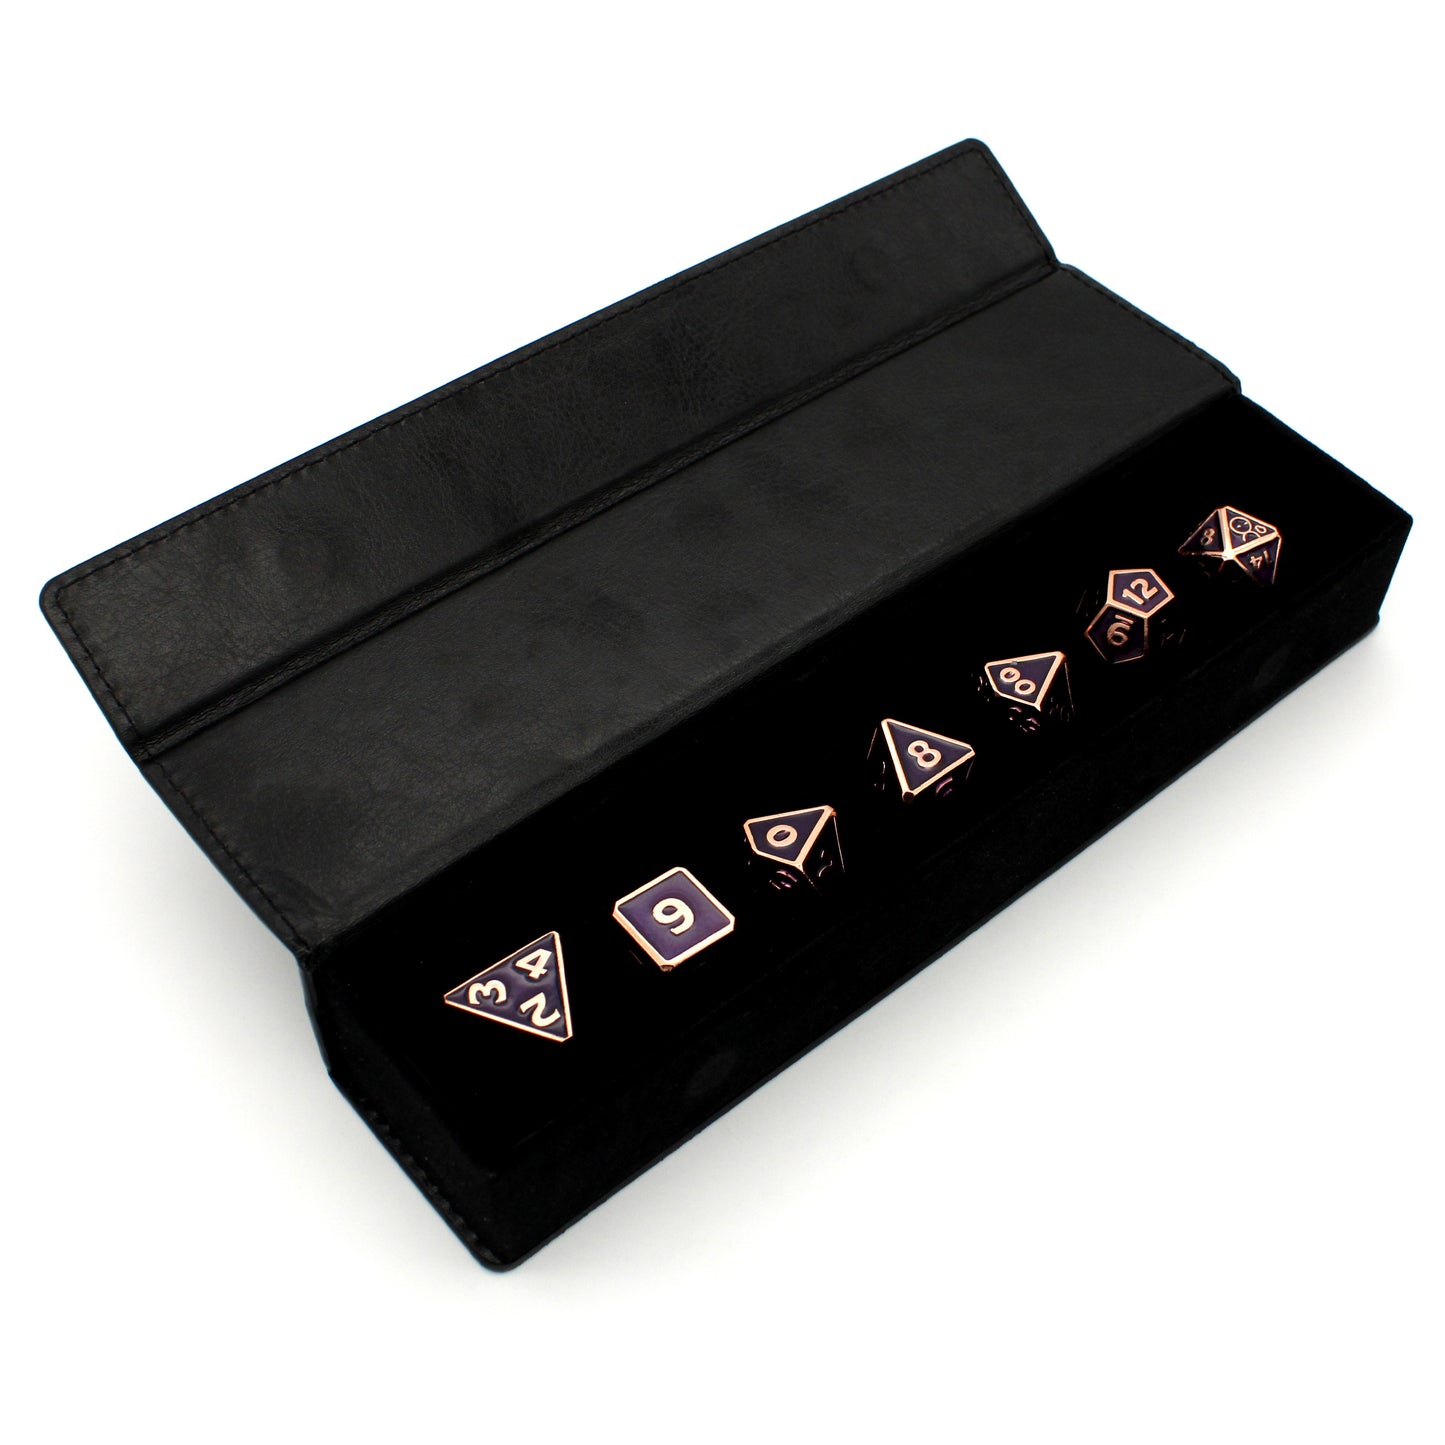 Sigmar is a 7-piece rose gold, framed metal set filled with an intense, purple enamel. It is part of the Adventure Is Nigh collection.